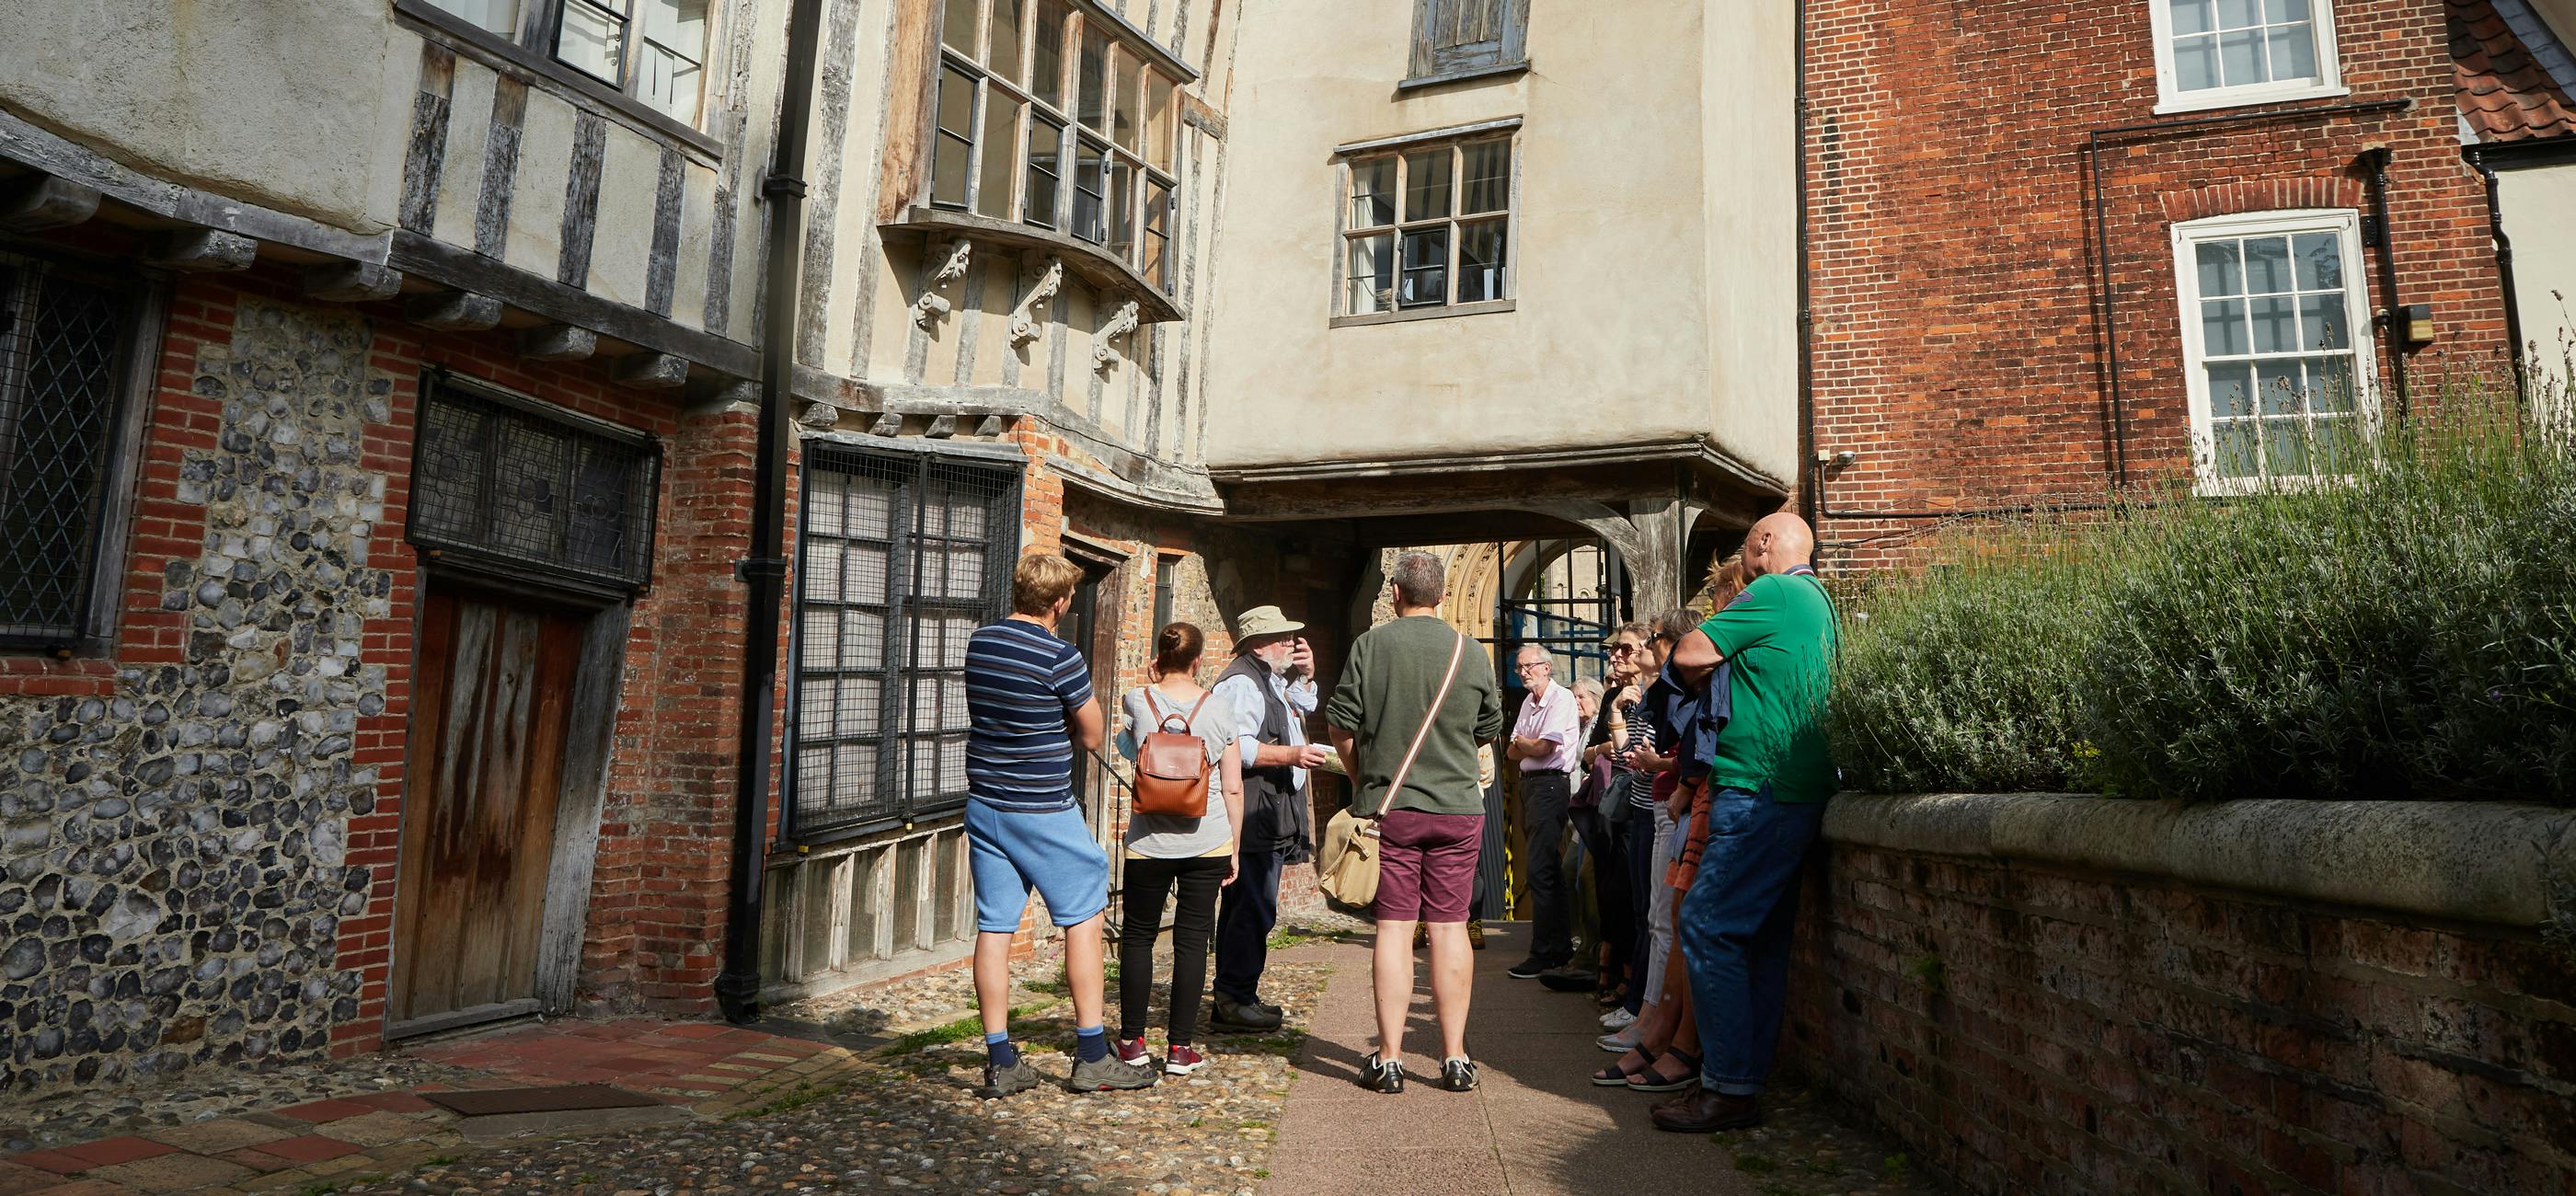 A group of people listen to a guide next to a Tudor building with wonky beams and cobbled street